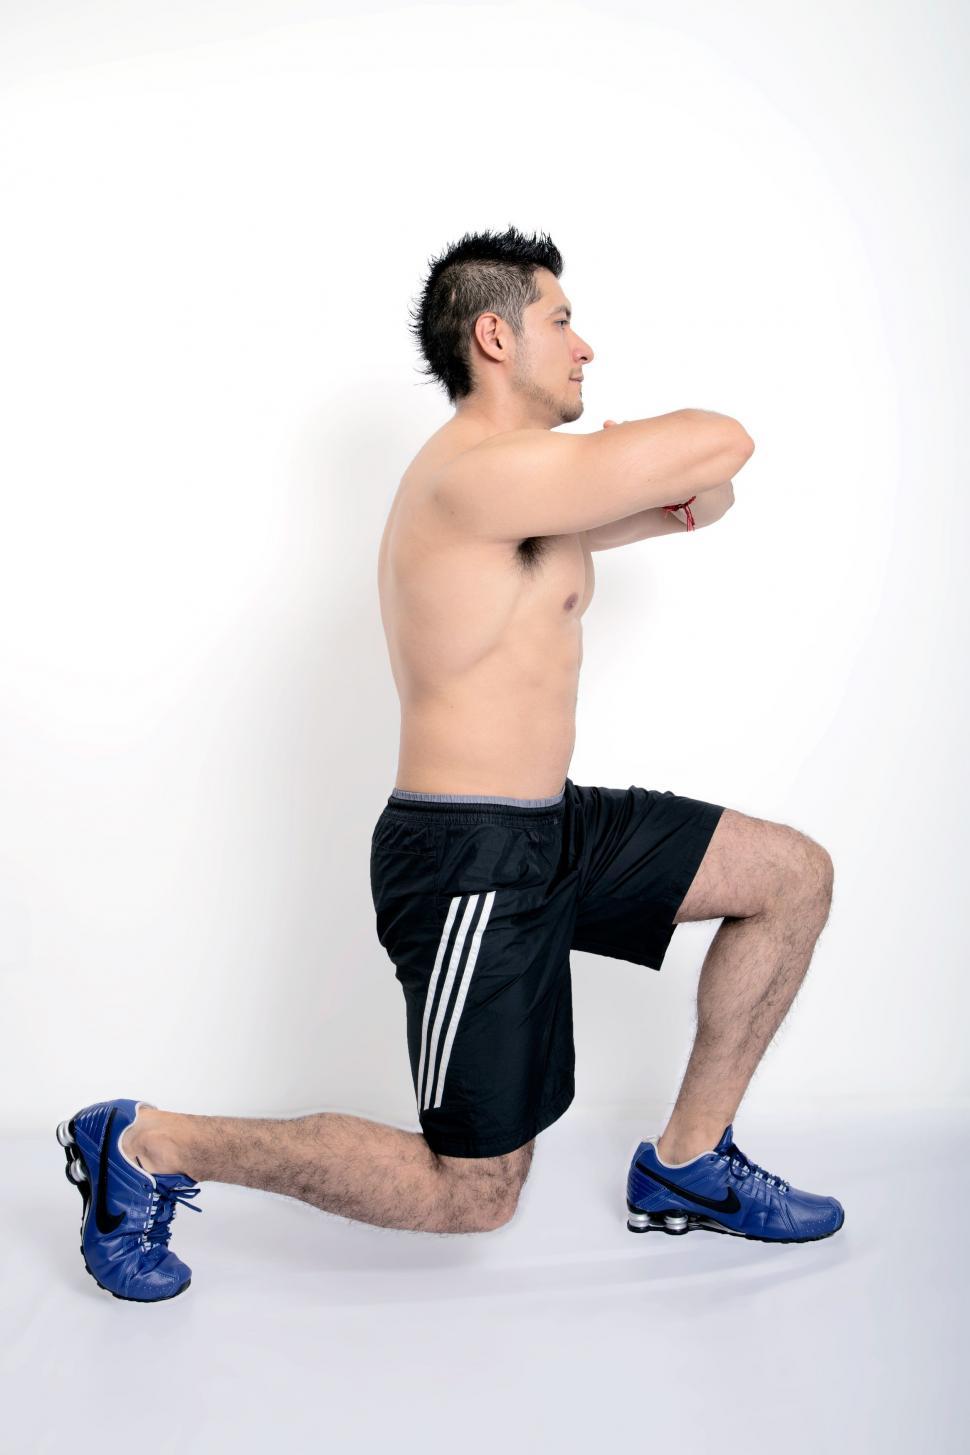 Free Image of Man Doing Stretching Exercise 